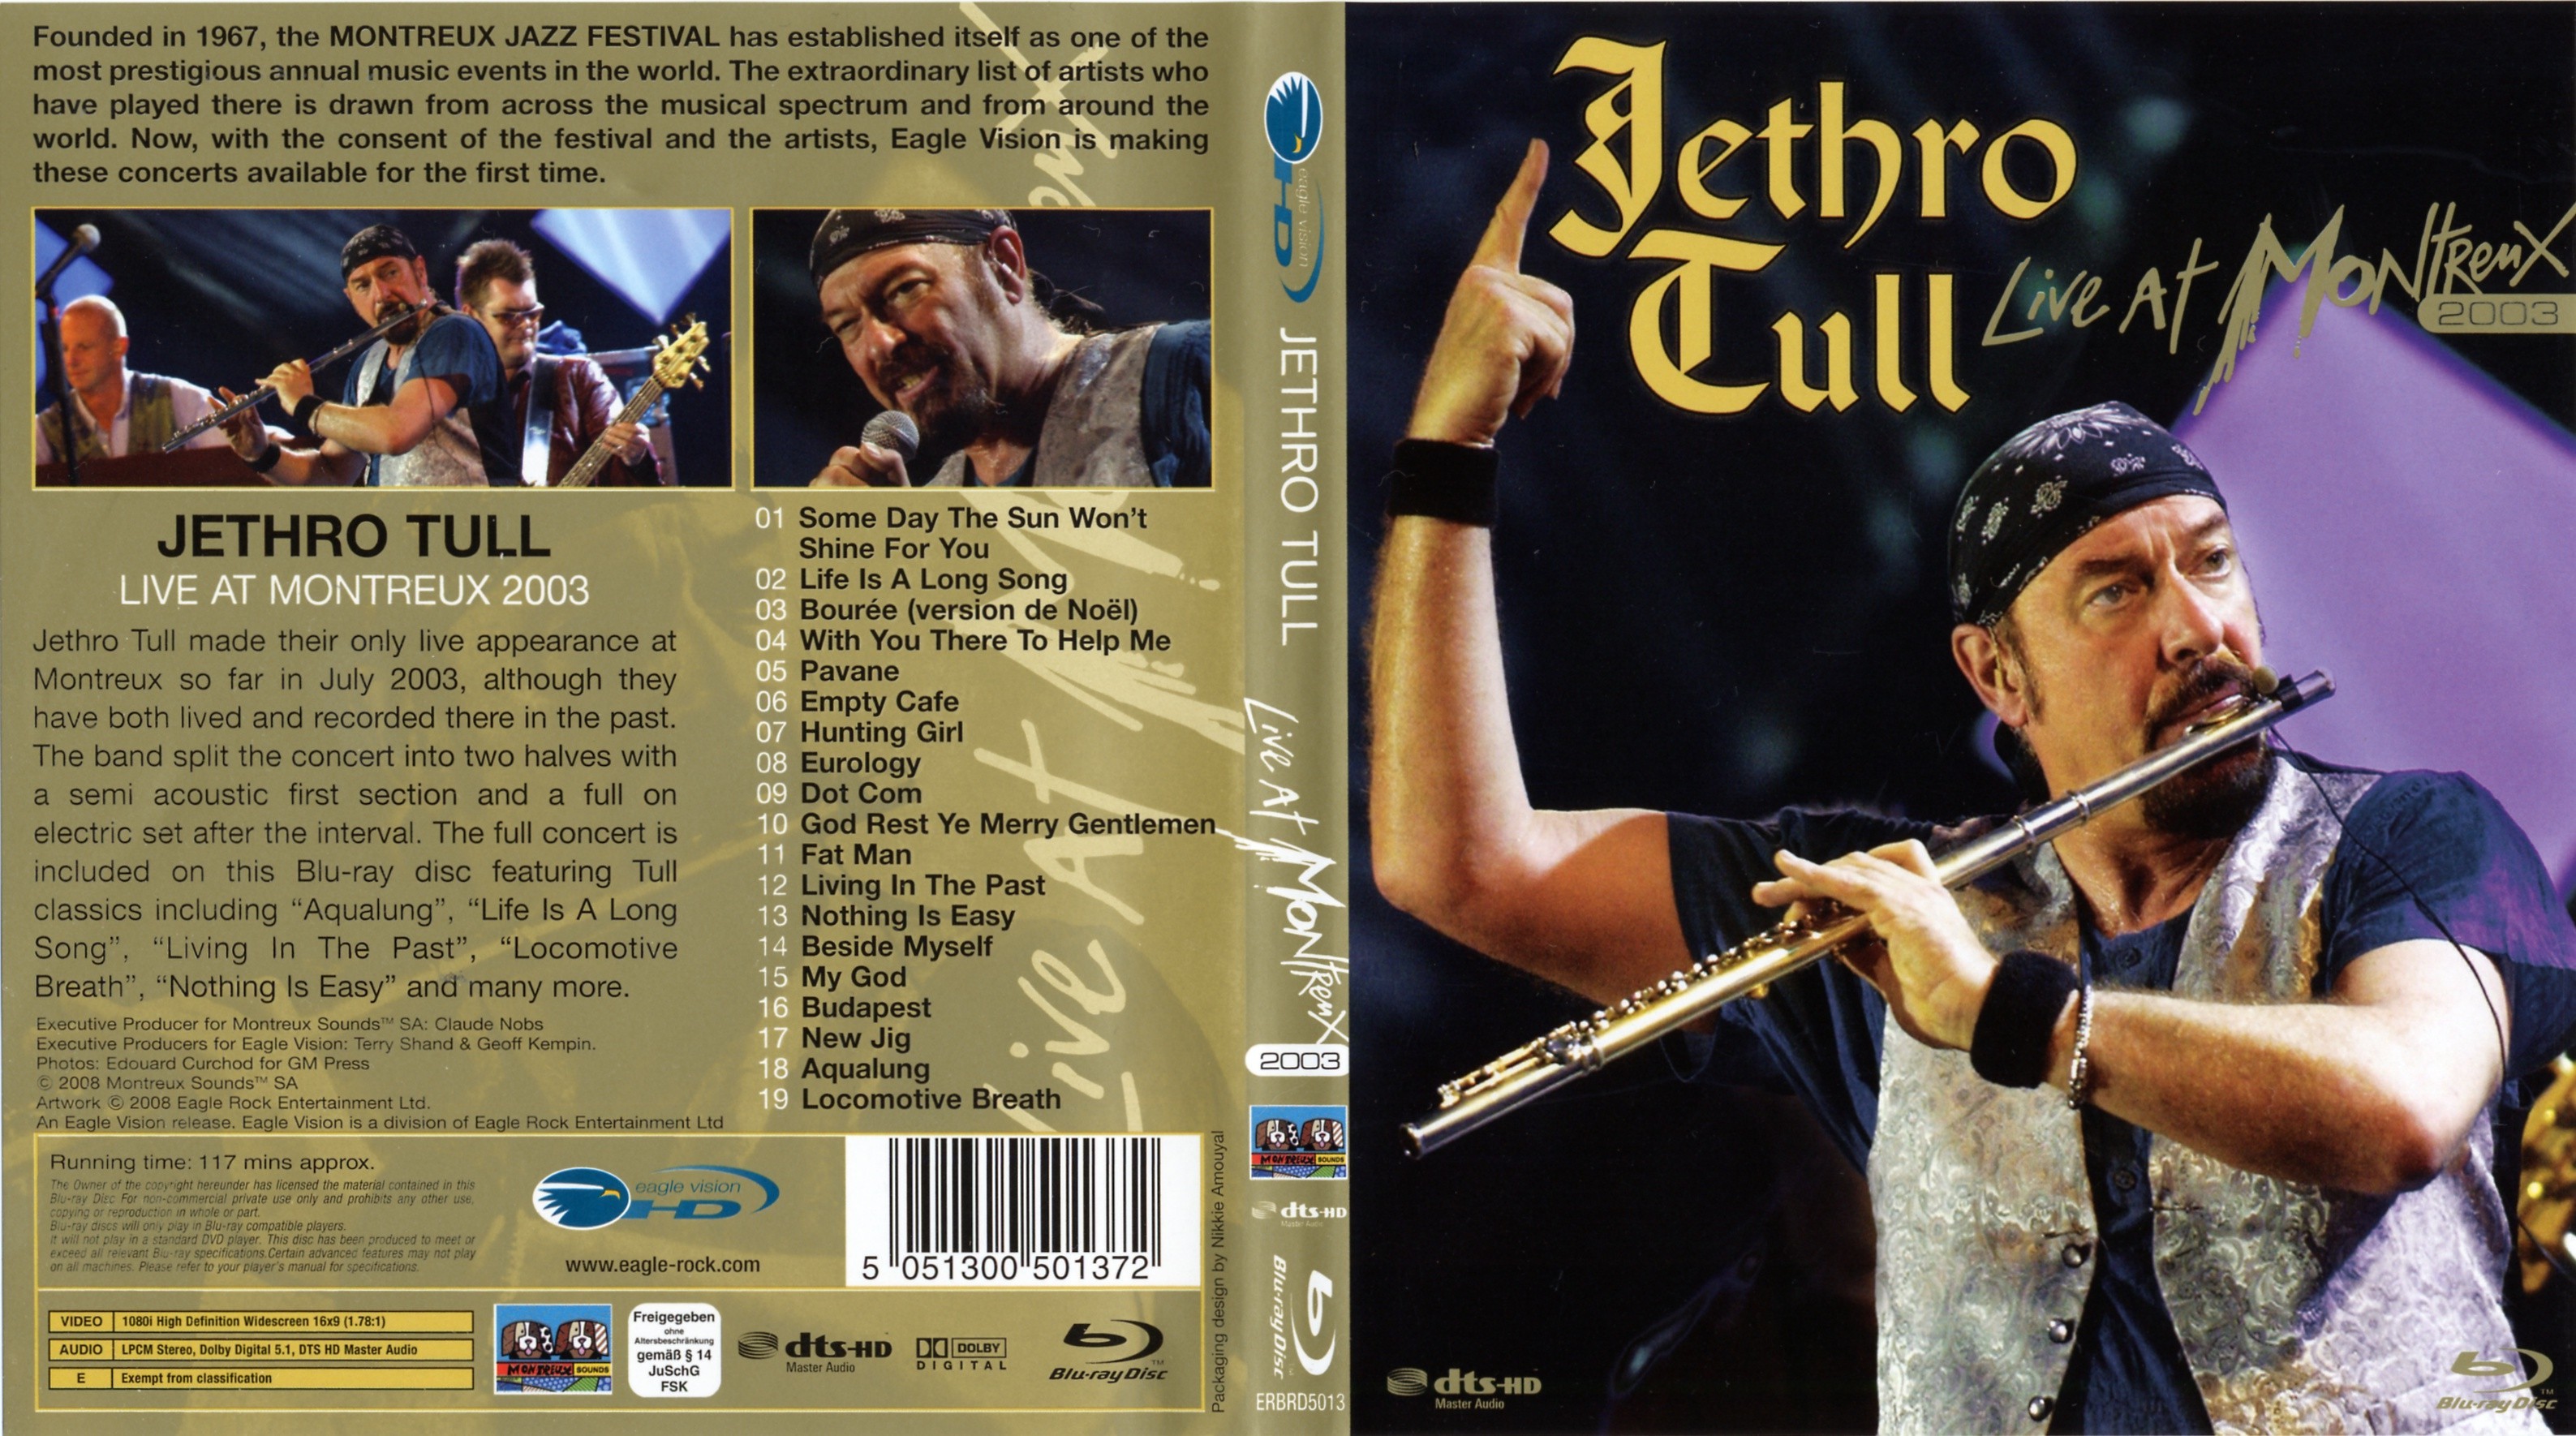 Jaquette DVD Jethro Tull - Live At Montreux (BLU-RAY)